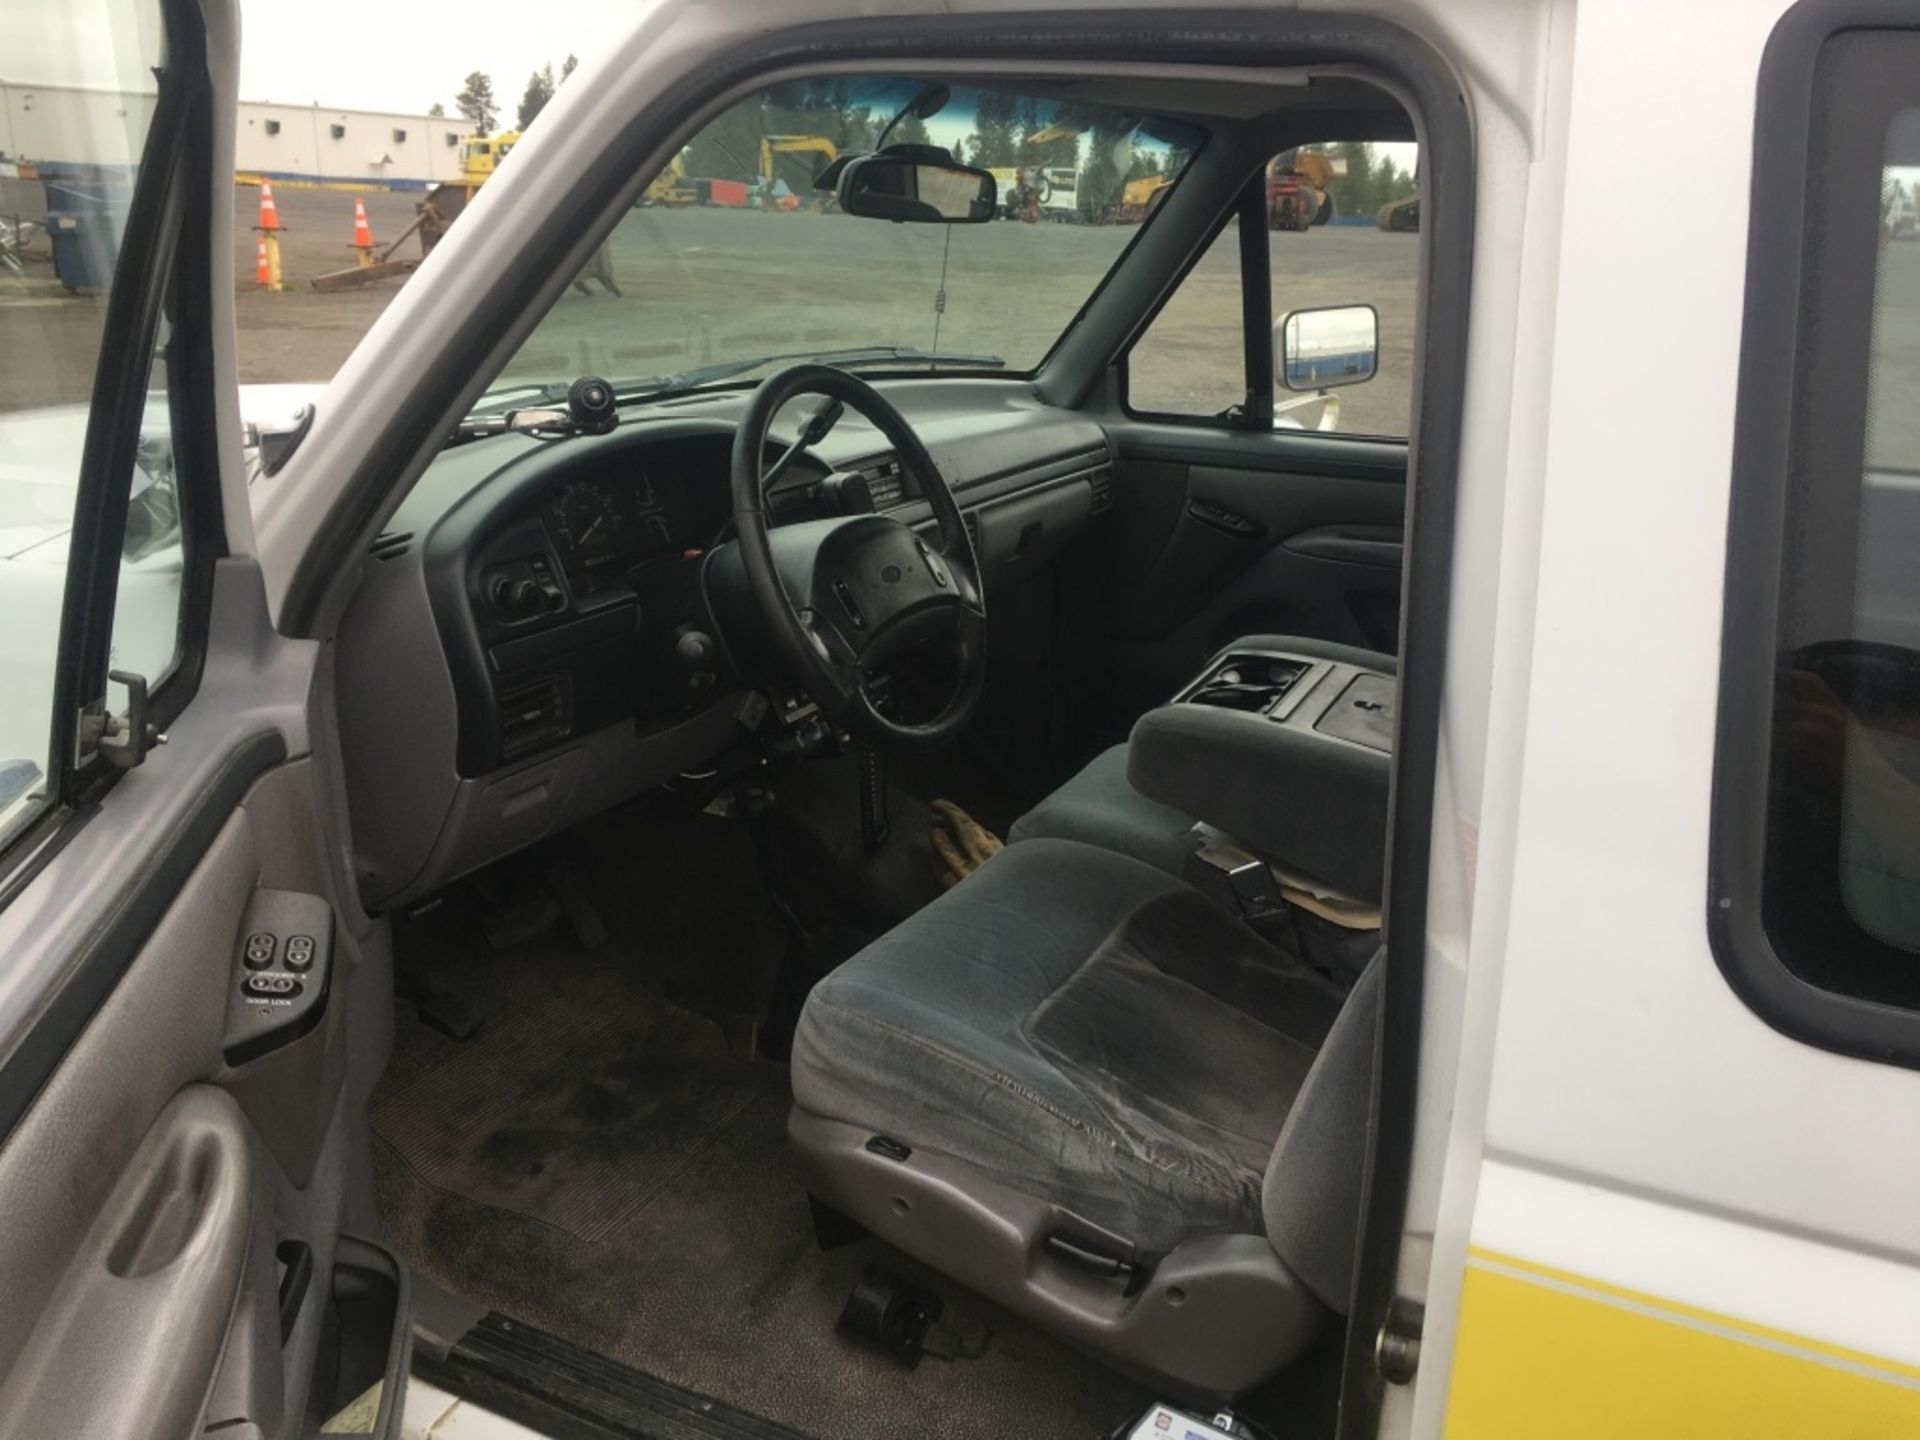 1996 Ford F250 XLT 4x4 Extra Cab Pickup - Image 7 of 20